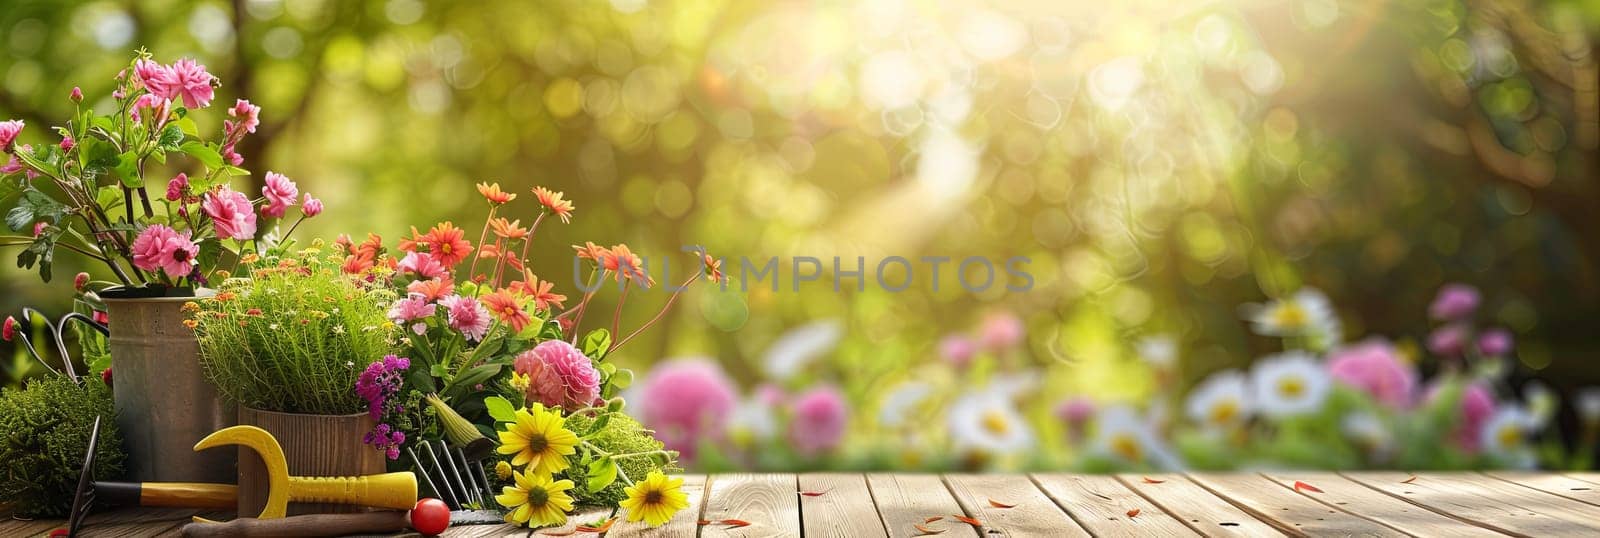 A variety of vibrant flowers and garden tools arranged neatly on a wooden table with a blurred natural background.